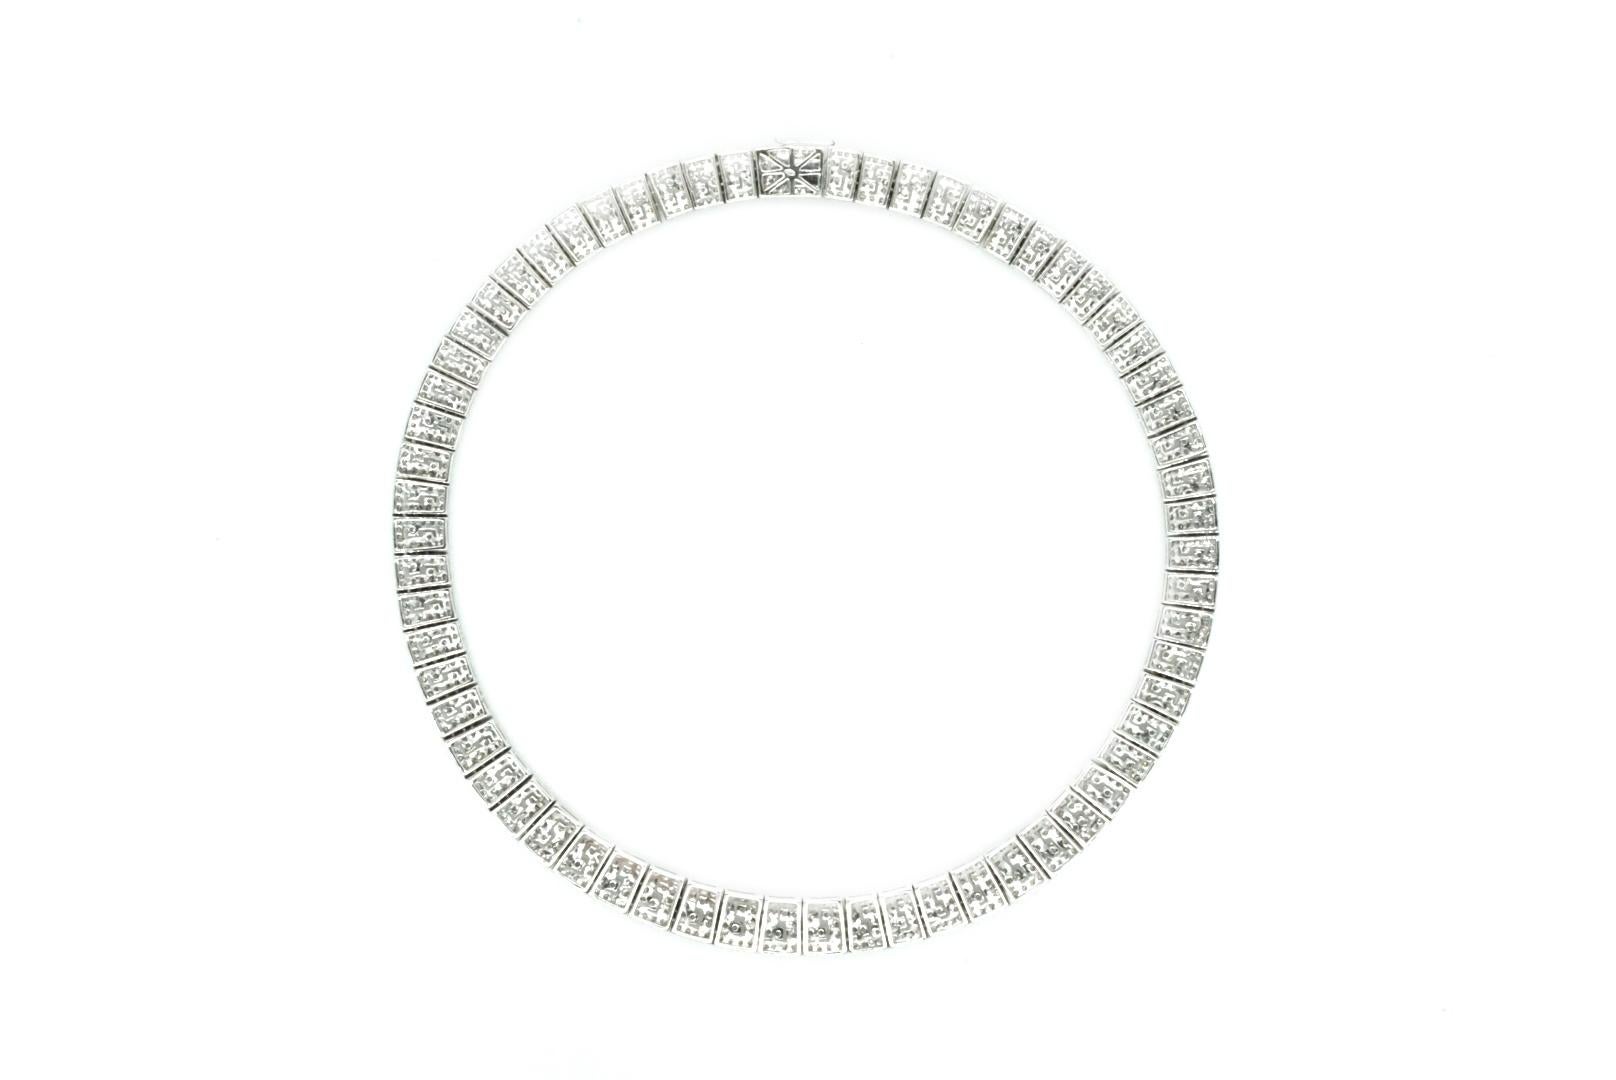 An 18kt White Gold and Diamond Necklace. Round diamonds weighing ap. 14.60 cts. Length 16 5/8 inches. Made in the USA, circa 1950.

Width 7/16 to 3/8 inch. 